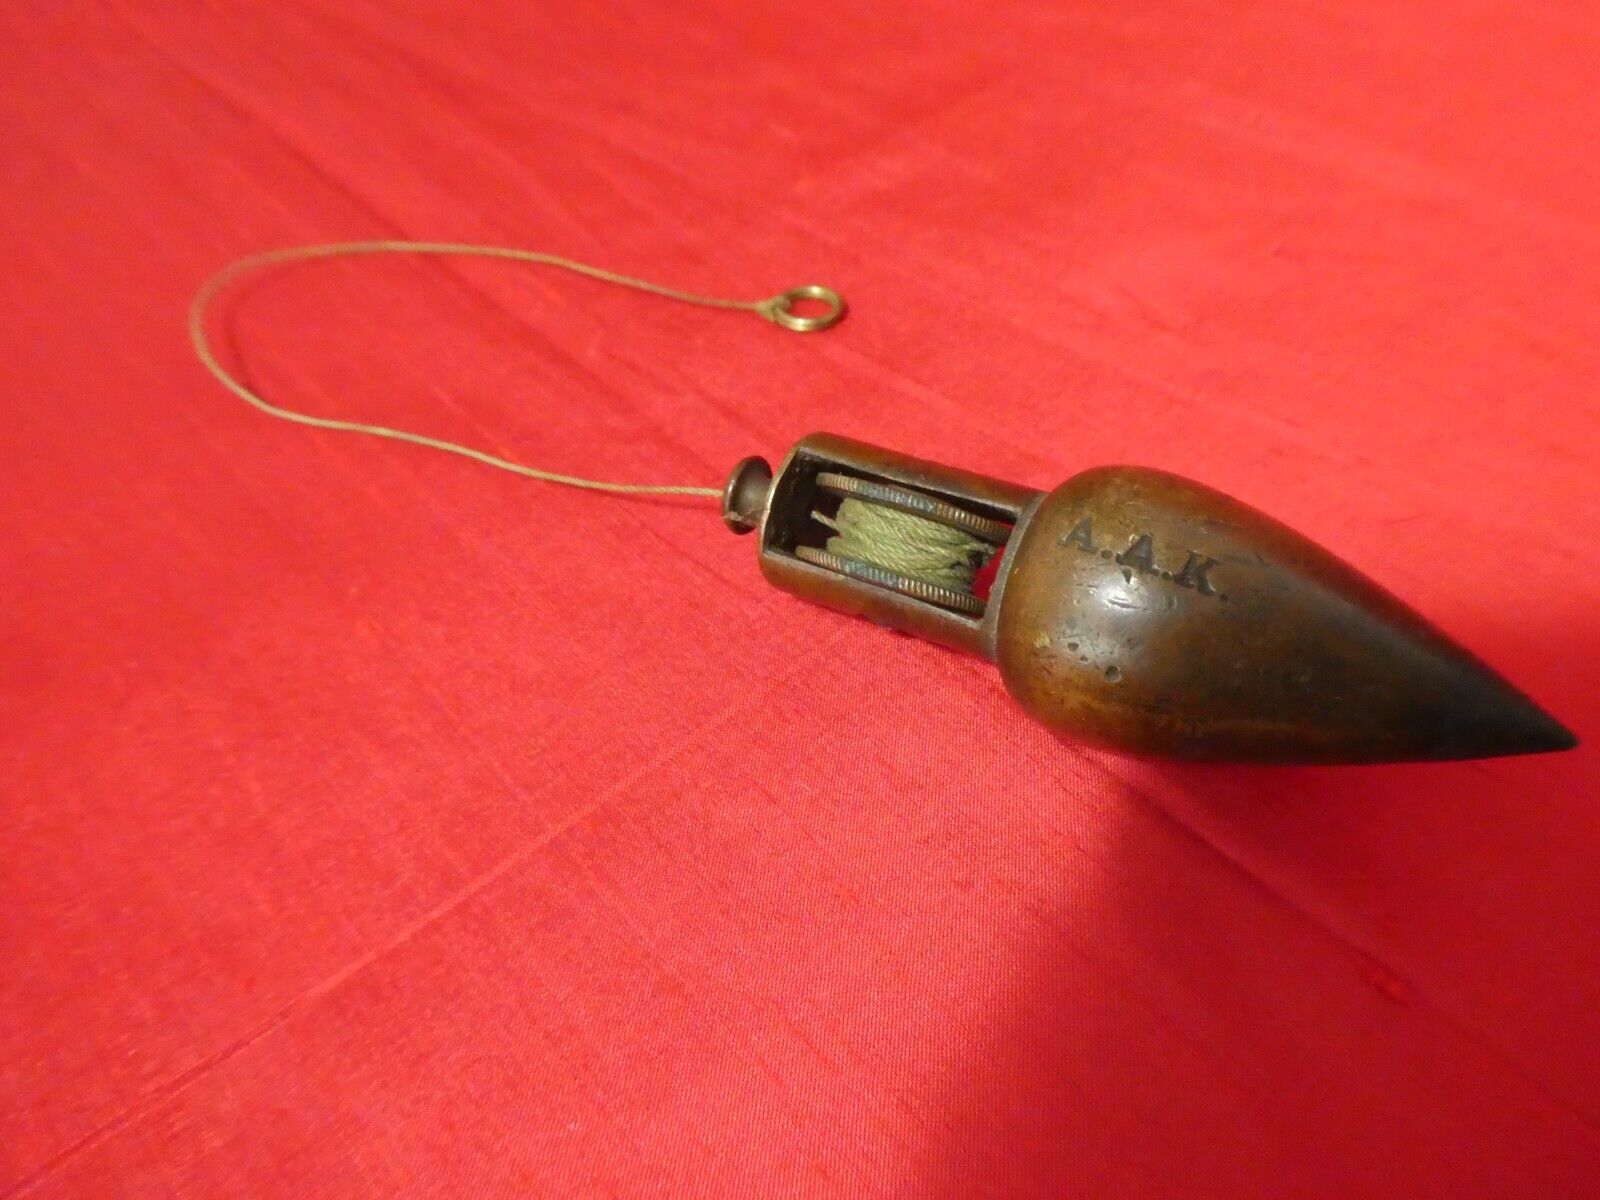 ANTIQUE SOLID BRASS PLUMB BOB with REEL & STRING A. A. K. pat 1874 WEIGHT 225 GR